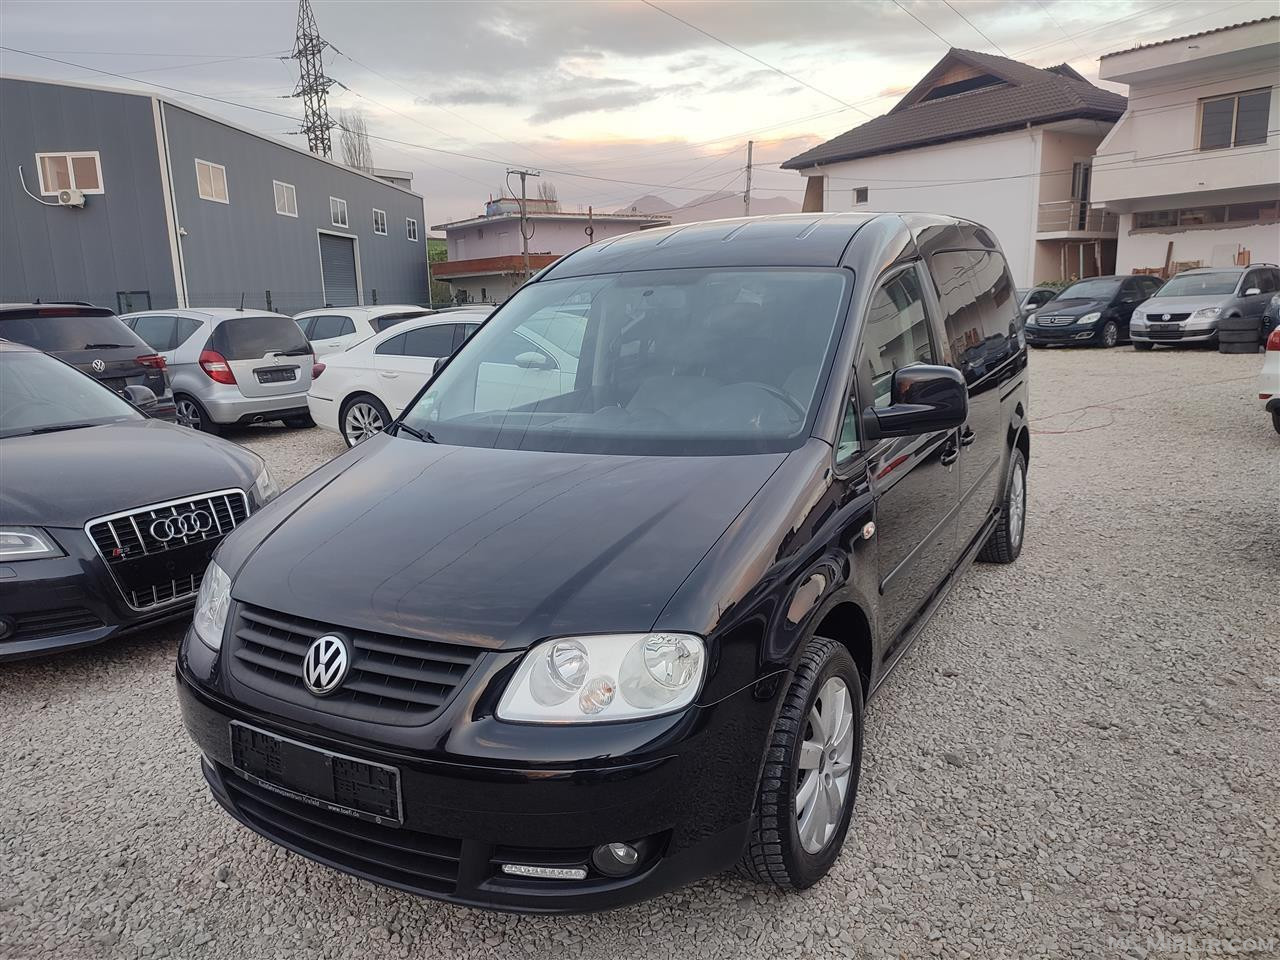 VW CADDY MAXI 2008 NAFTE 1.9 MANUALE